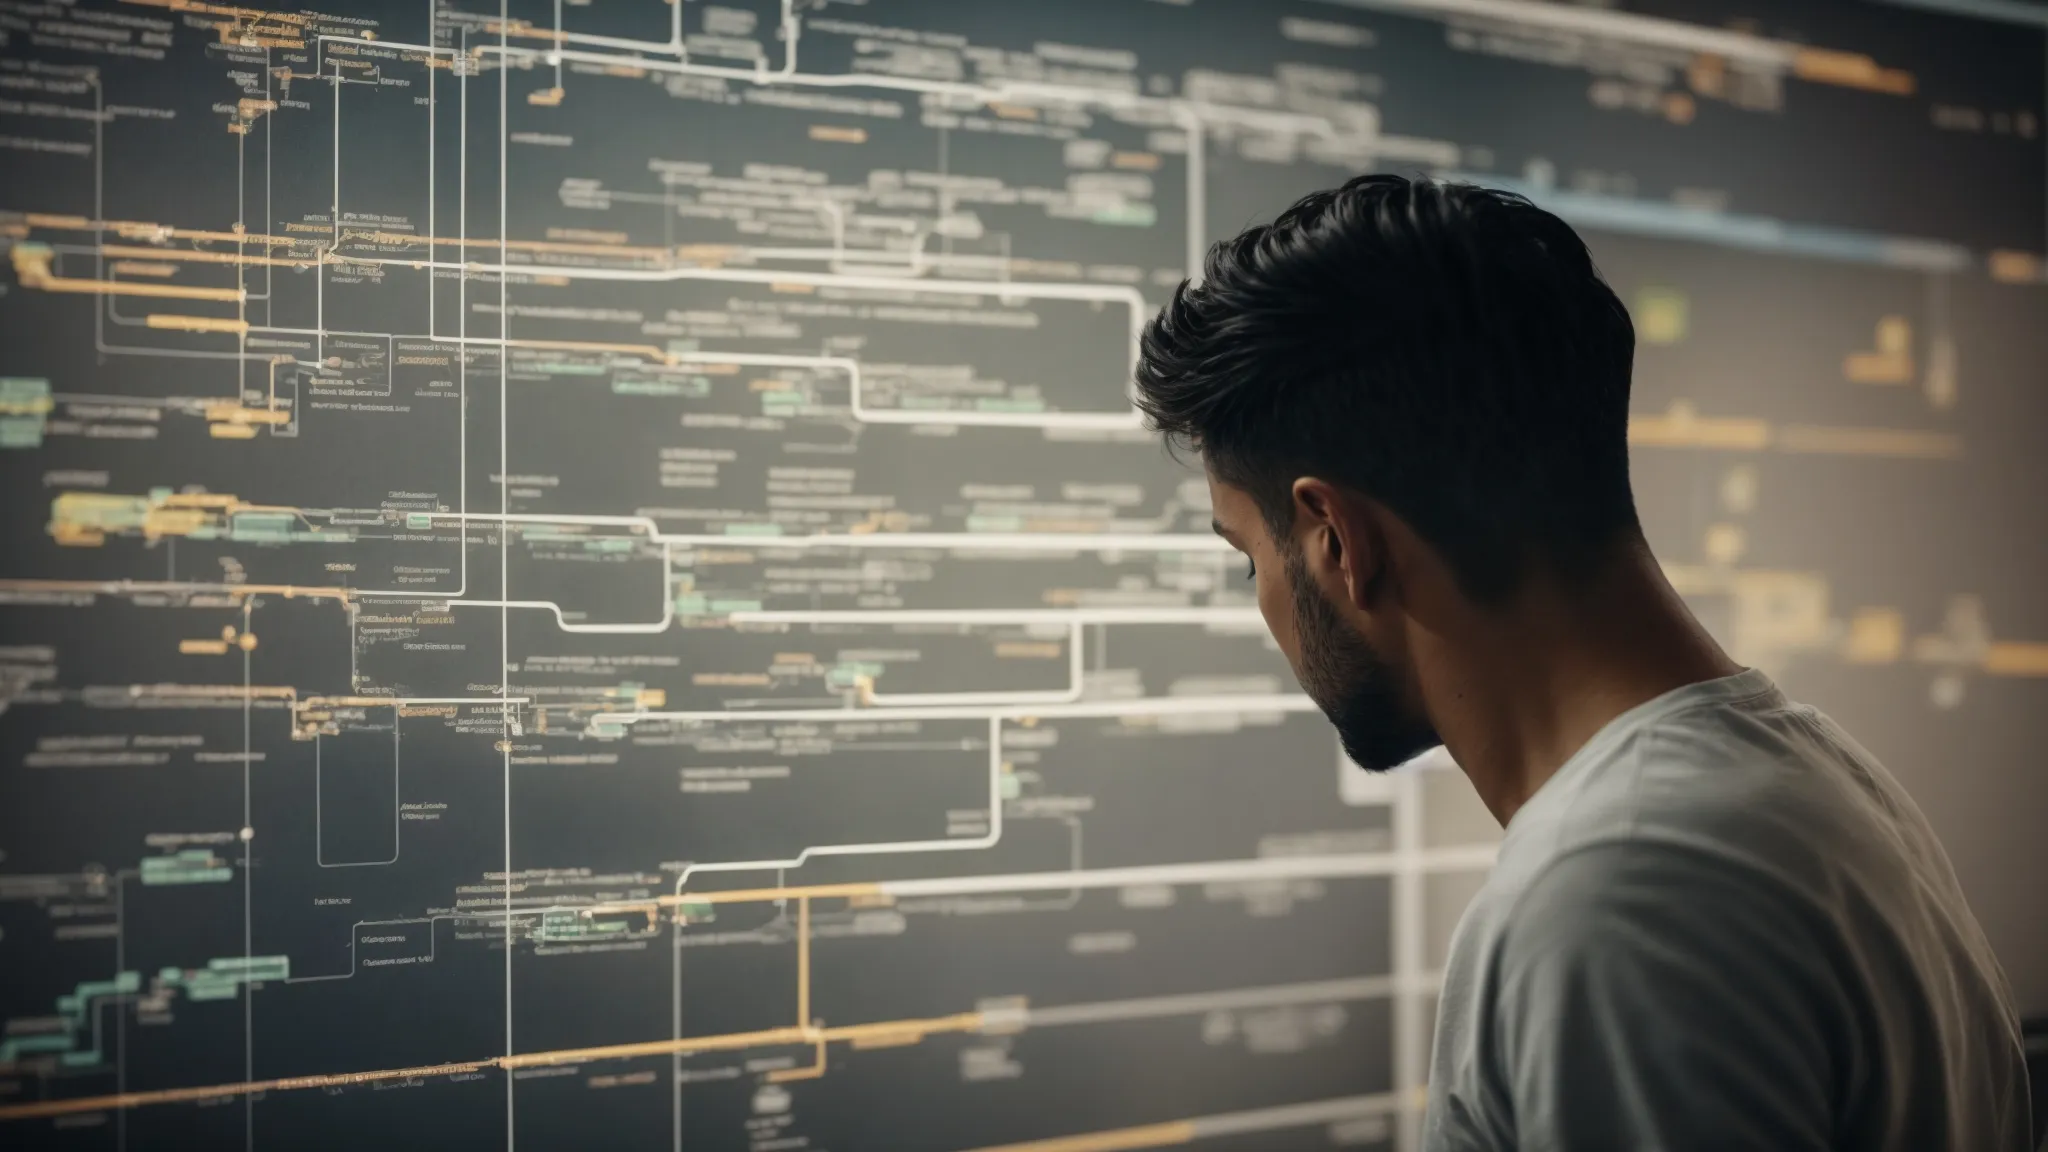 a focused individual analyzing a complex flowchart that visualizes various interconnected keyword clusters on a digital screen.